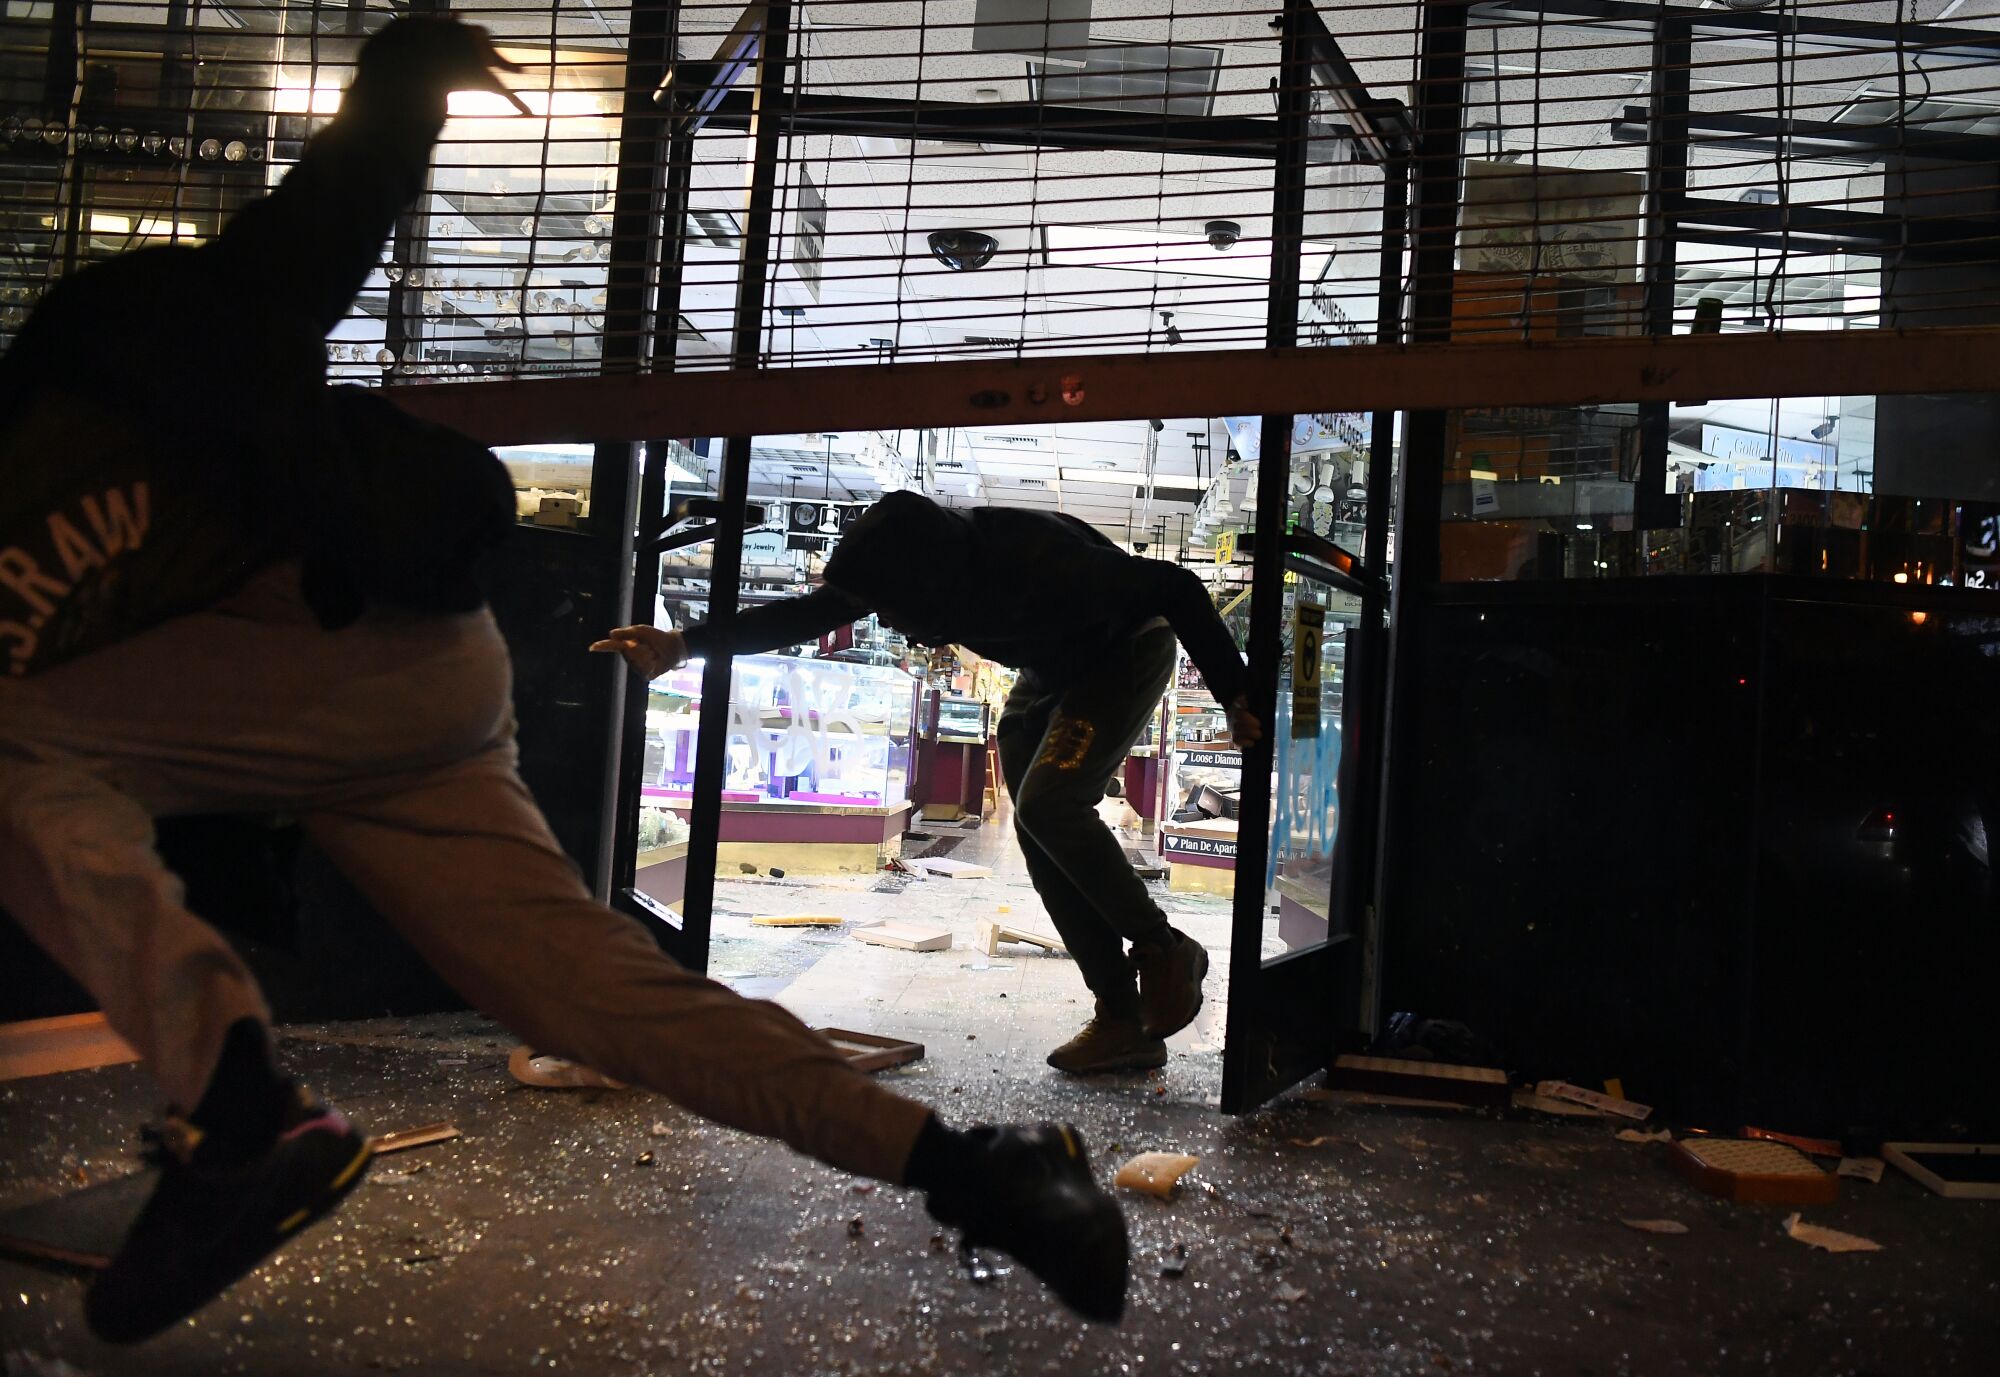 Looters run from a jewelry store as LAPD officers approach.